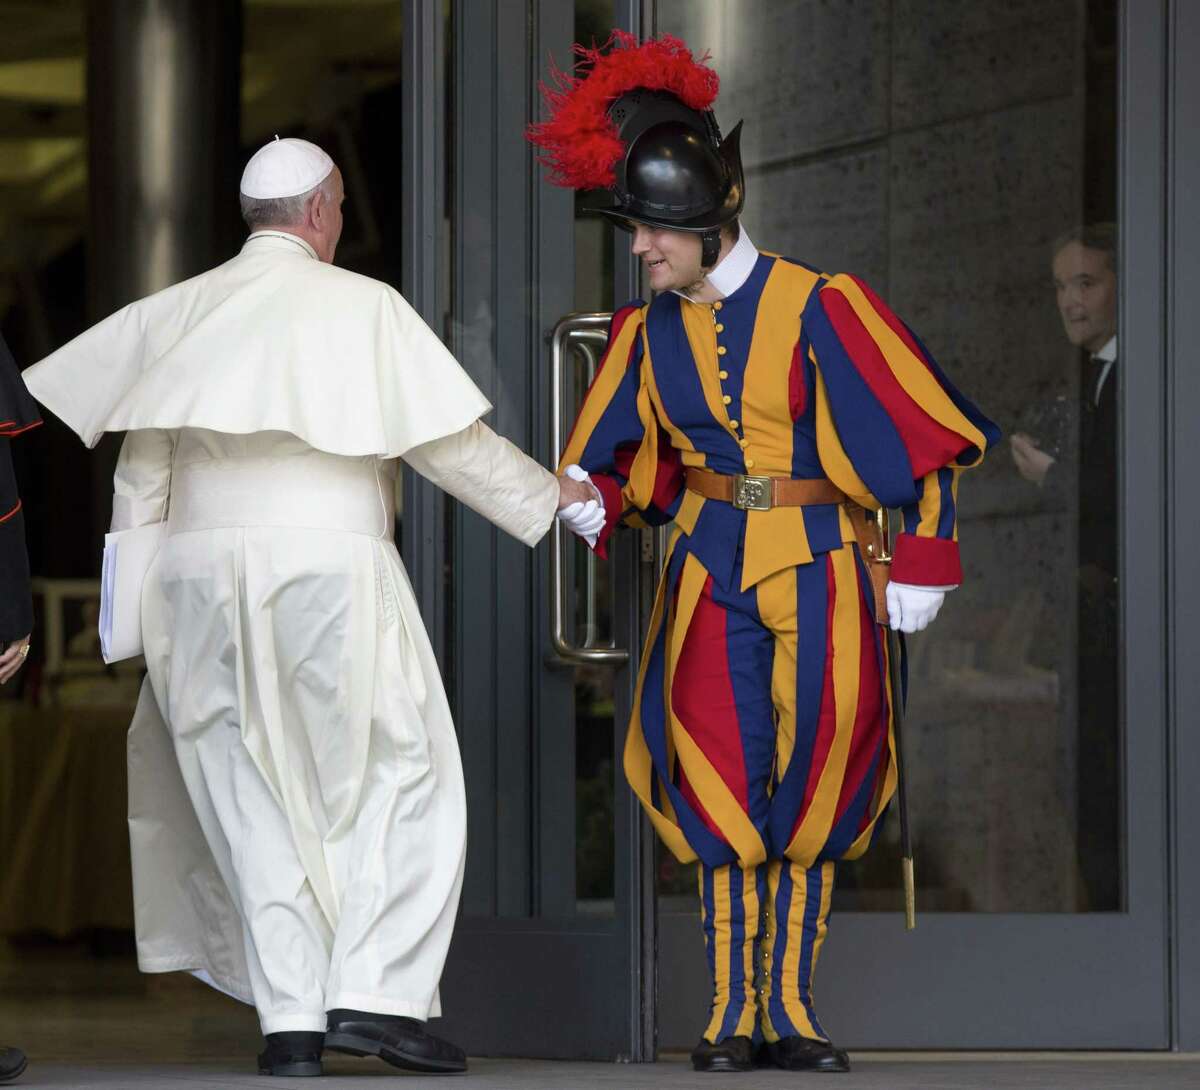 Pope Francis greets a Vatican Swiss Guard as he arrives for a morning session of a two-week synod on family issues, at the Vatican, Thursday, Oct. 16, 2014. (AP Photo/Alessandra Tarantino)